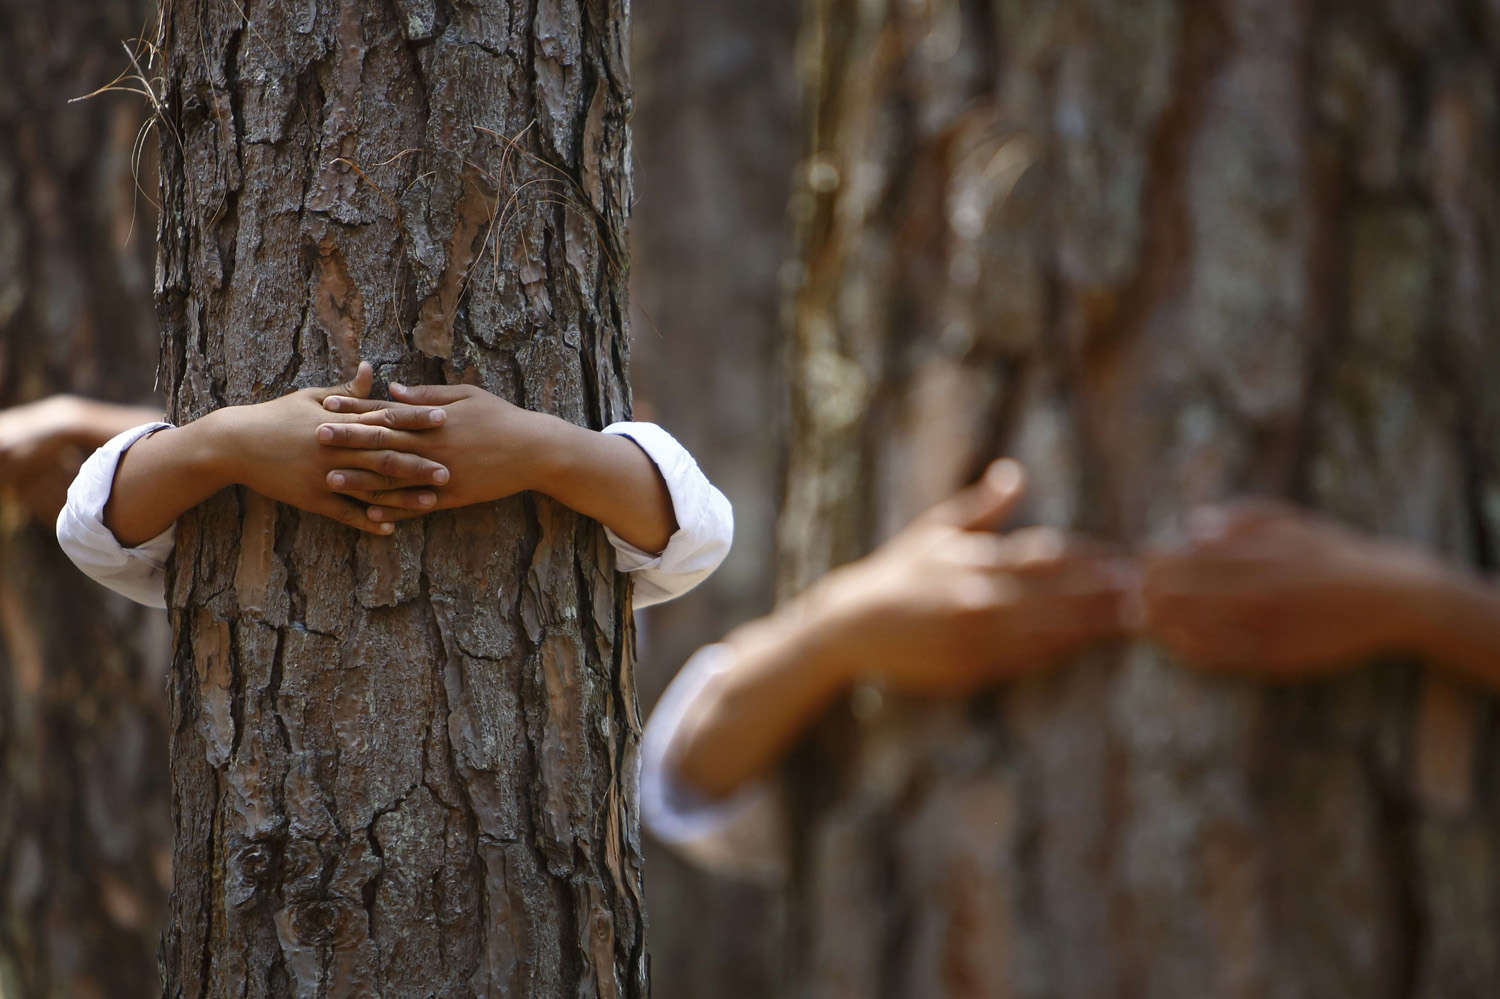 Hands hugging trees are pictured as participants take part in an attempt to break the Guinness World Record for the most number of people hugging trees for two minutes in Kathmandu